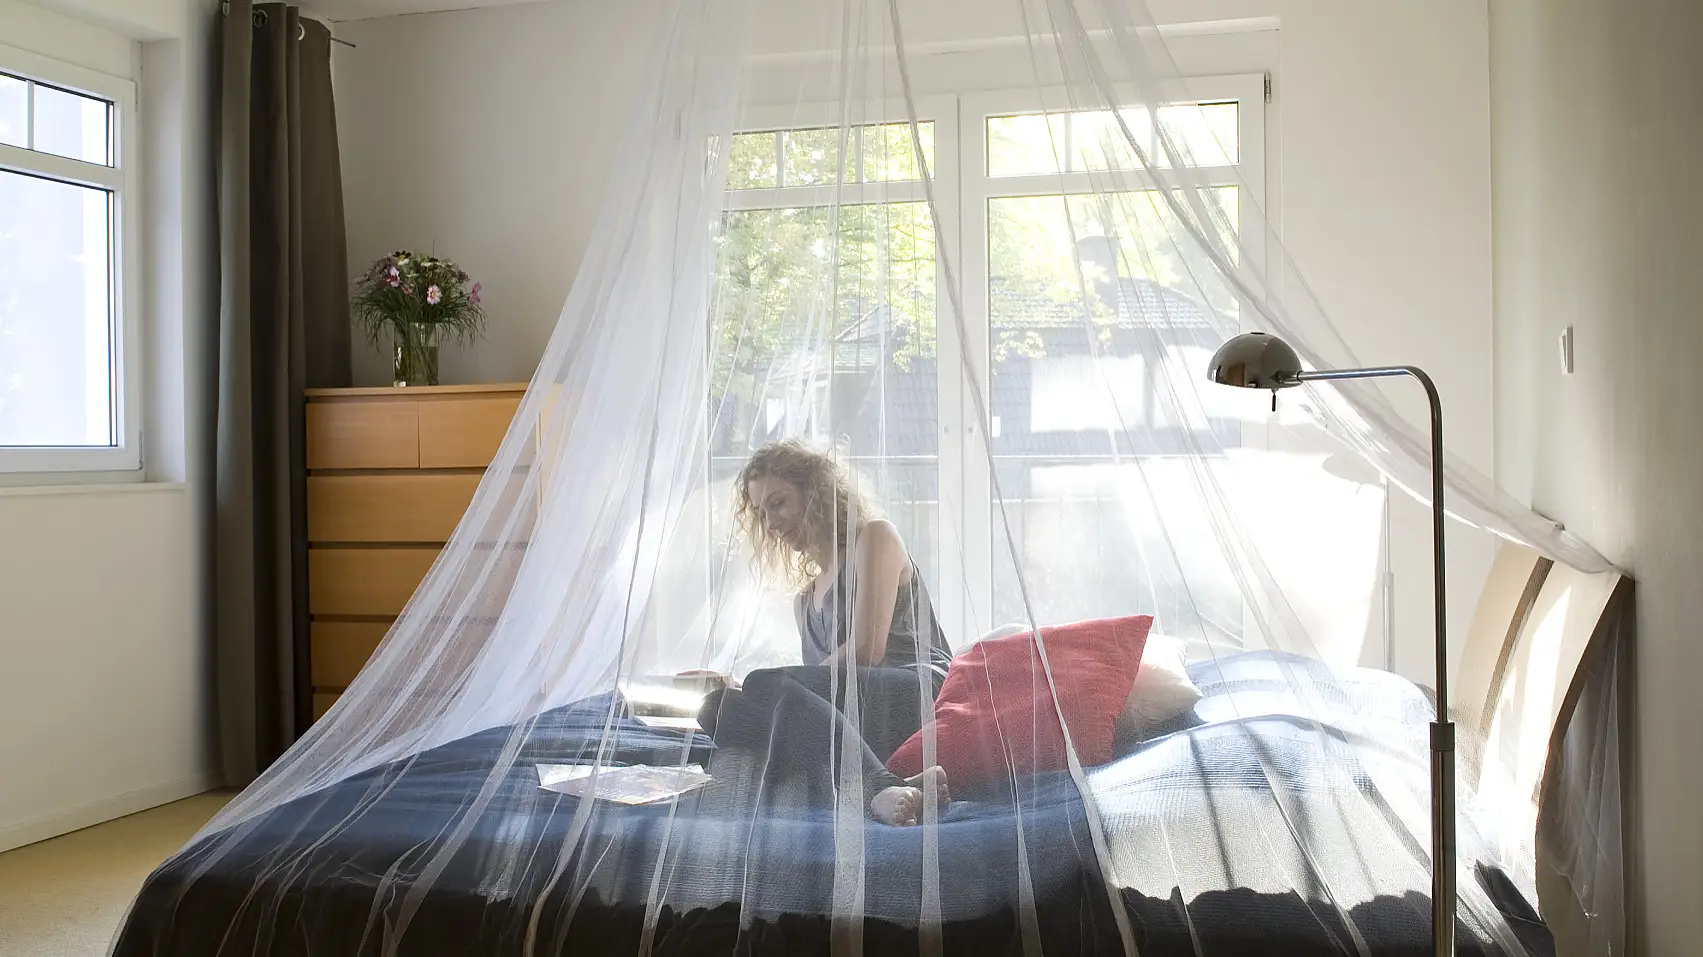 A mosquito net provides insect protection and is attached to the ceiling in the bedroom of your home or while travelling.